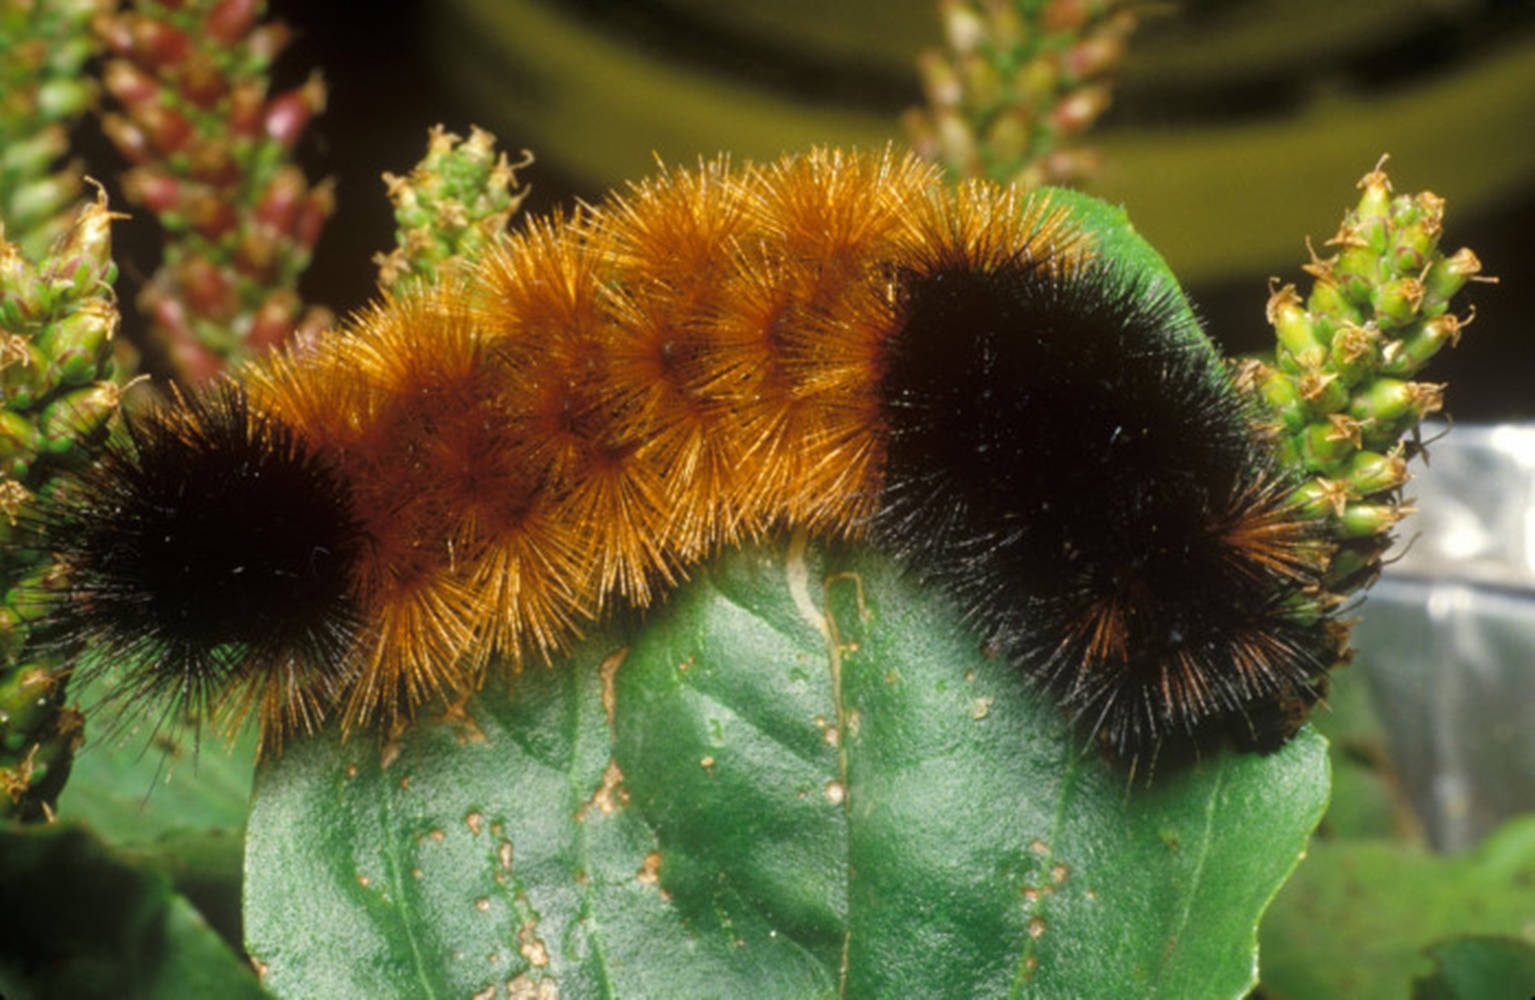 Brown And Black-Haired Caterpillar Wallpaper